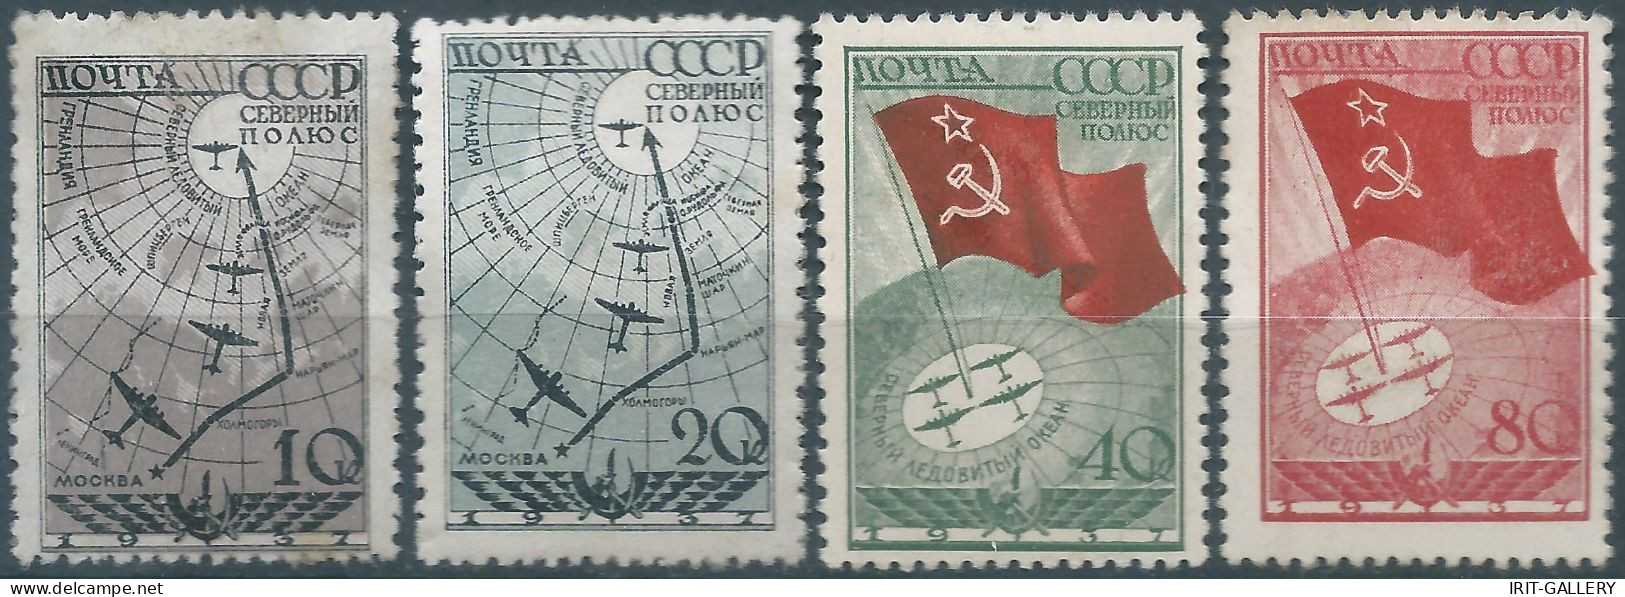 Russia-Union Of Soviet-CCCP,1938 North Pole Flight Expedition,Mint ,Value:€19,50 - Unused Stamps